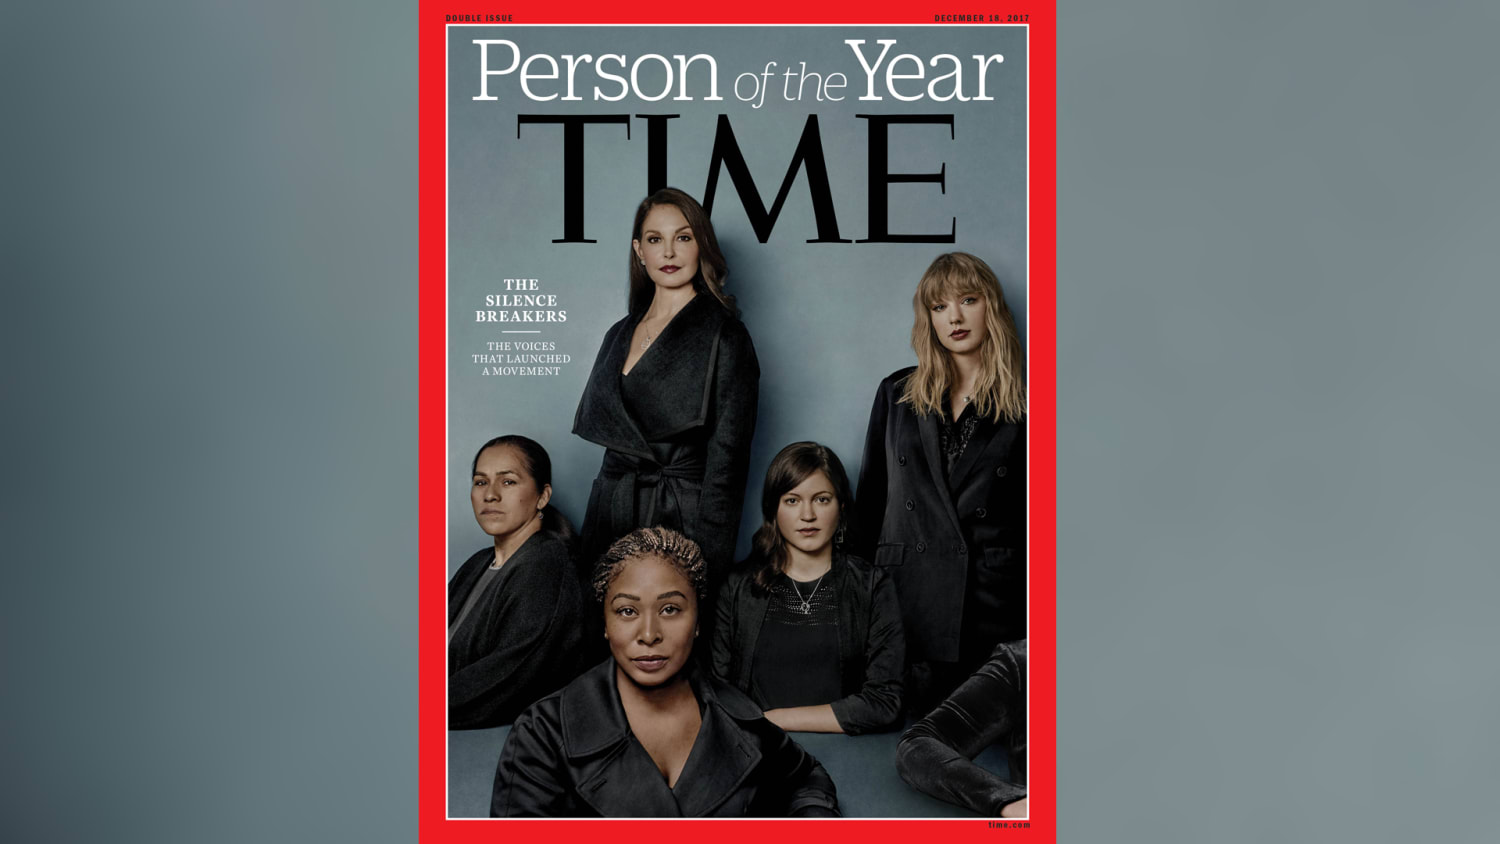 The Silence Breakers are TIME's 2017 Person of the Year - TODAY.com1920 x 1080